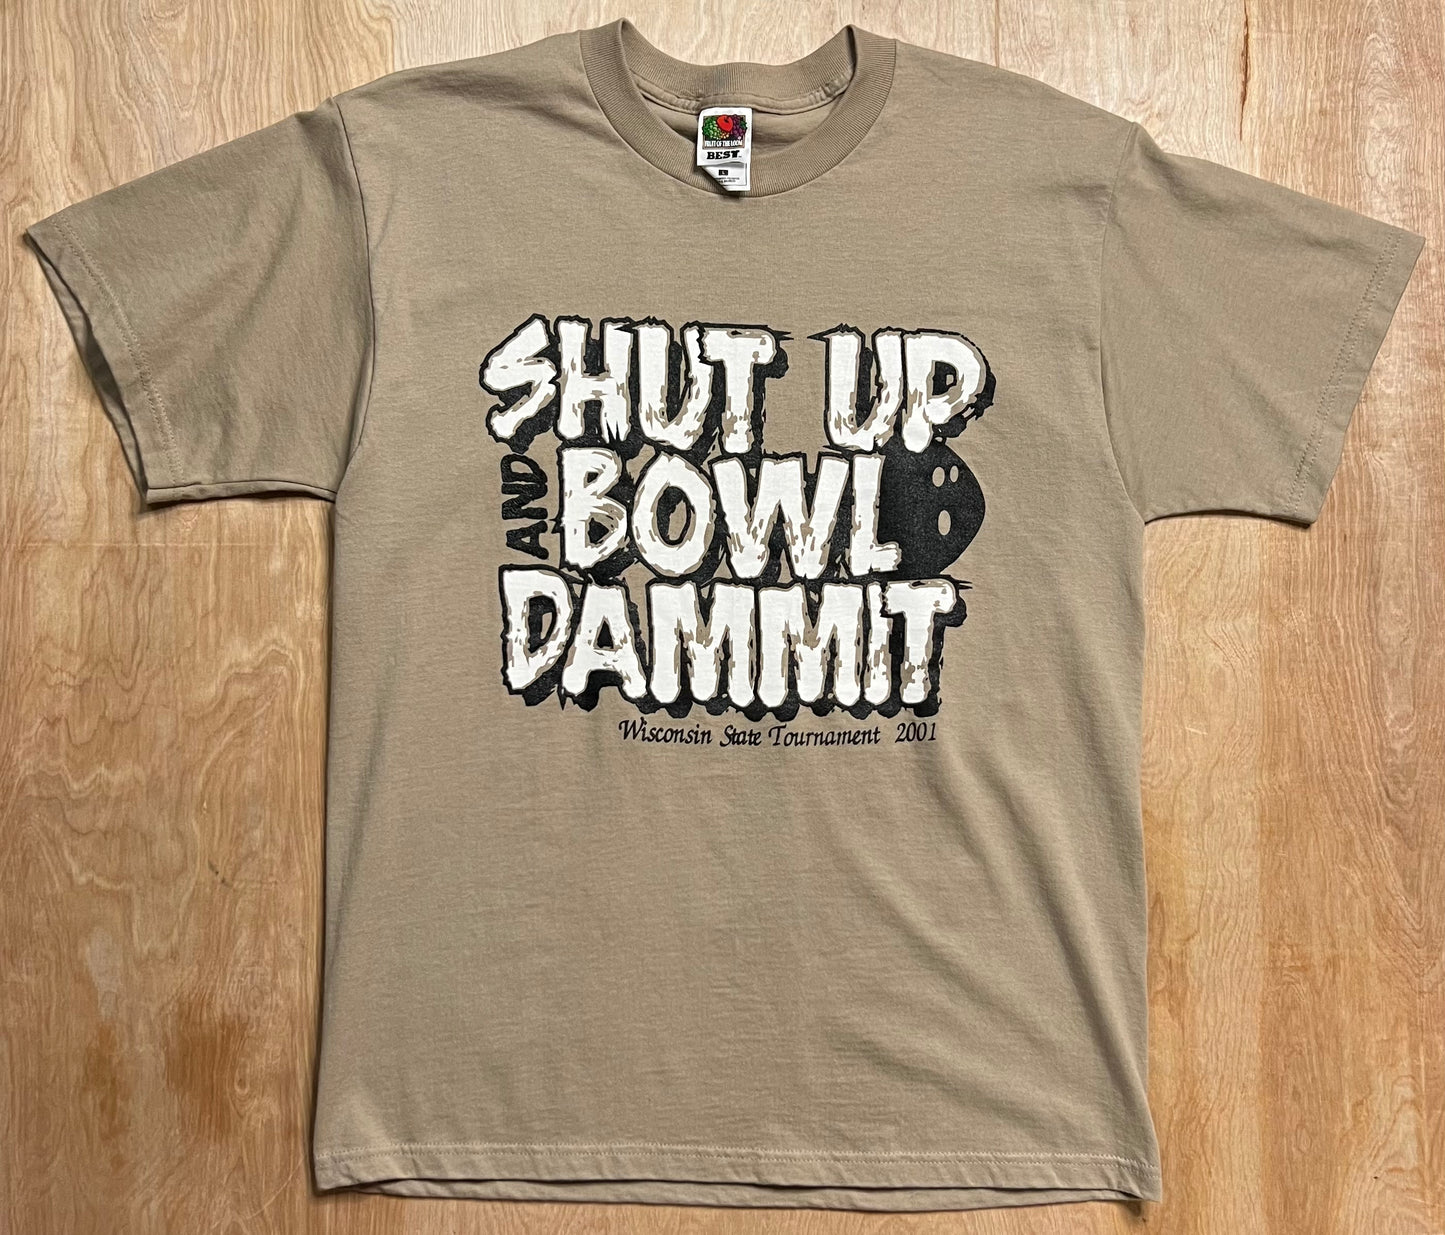 2001 "Shut Up and Bowl Damnit" Wisconsin State Tournament T-Shirt